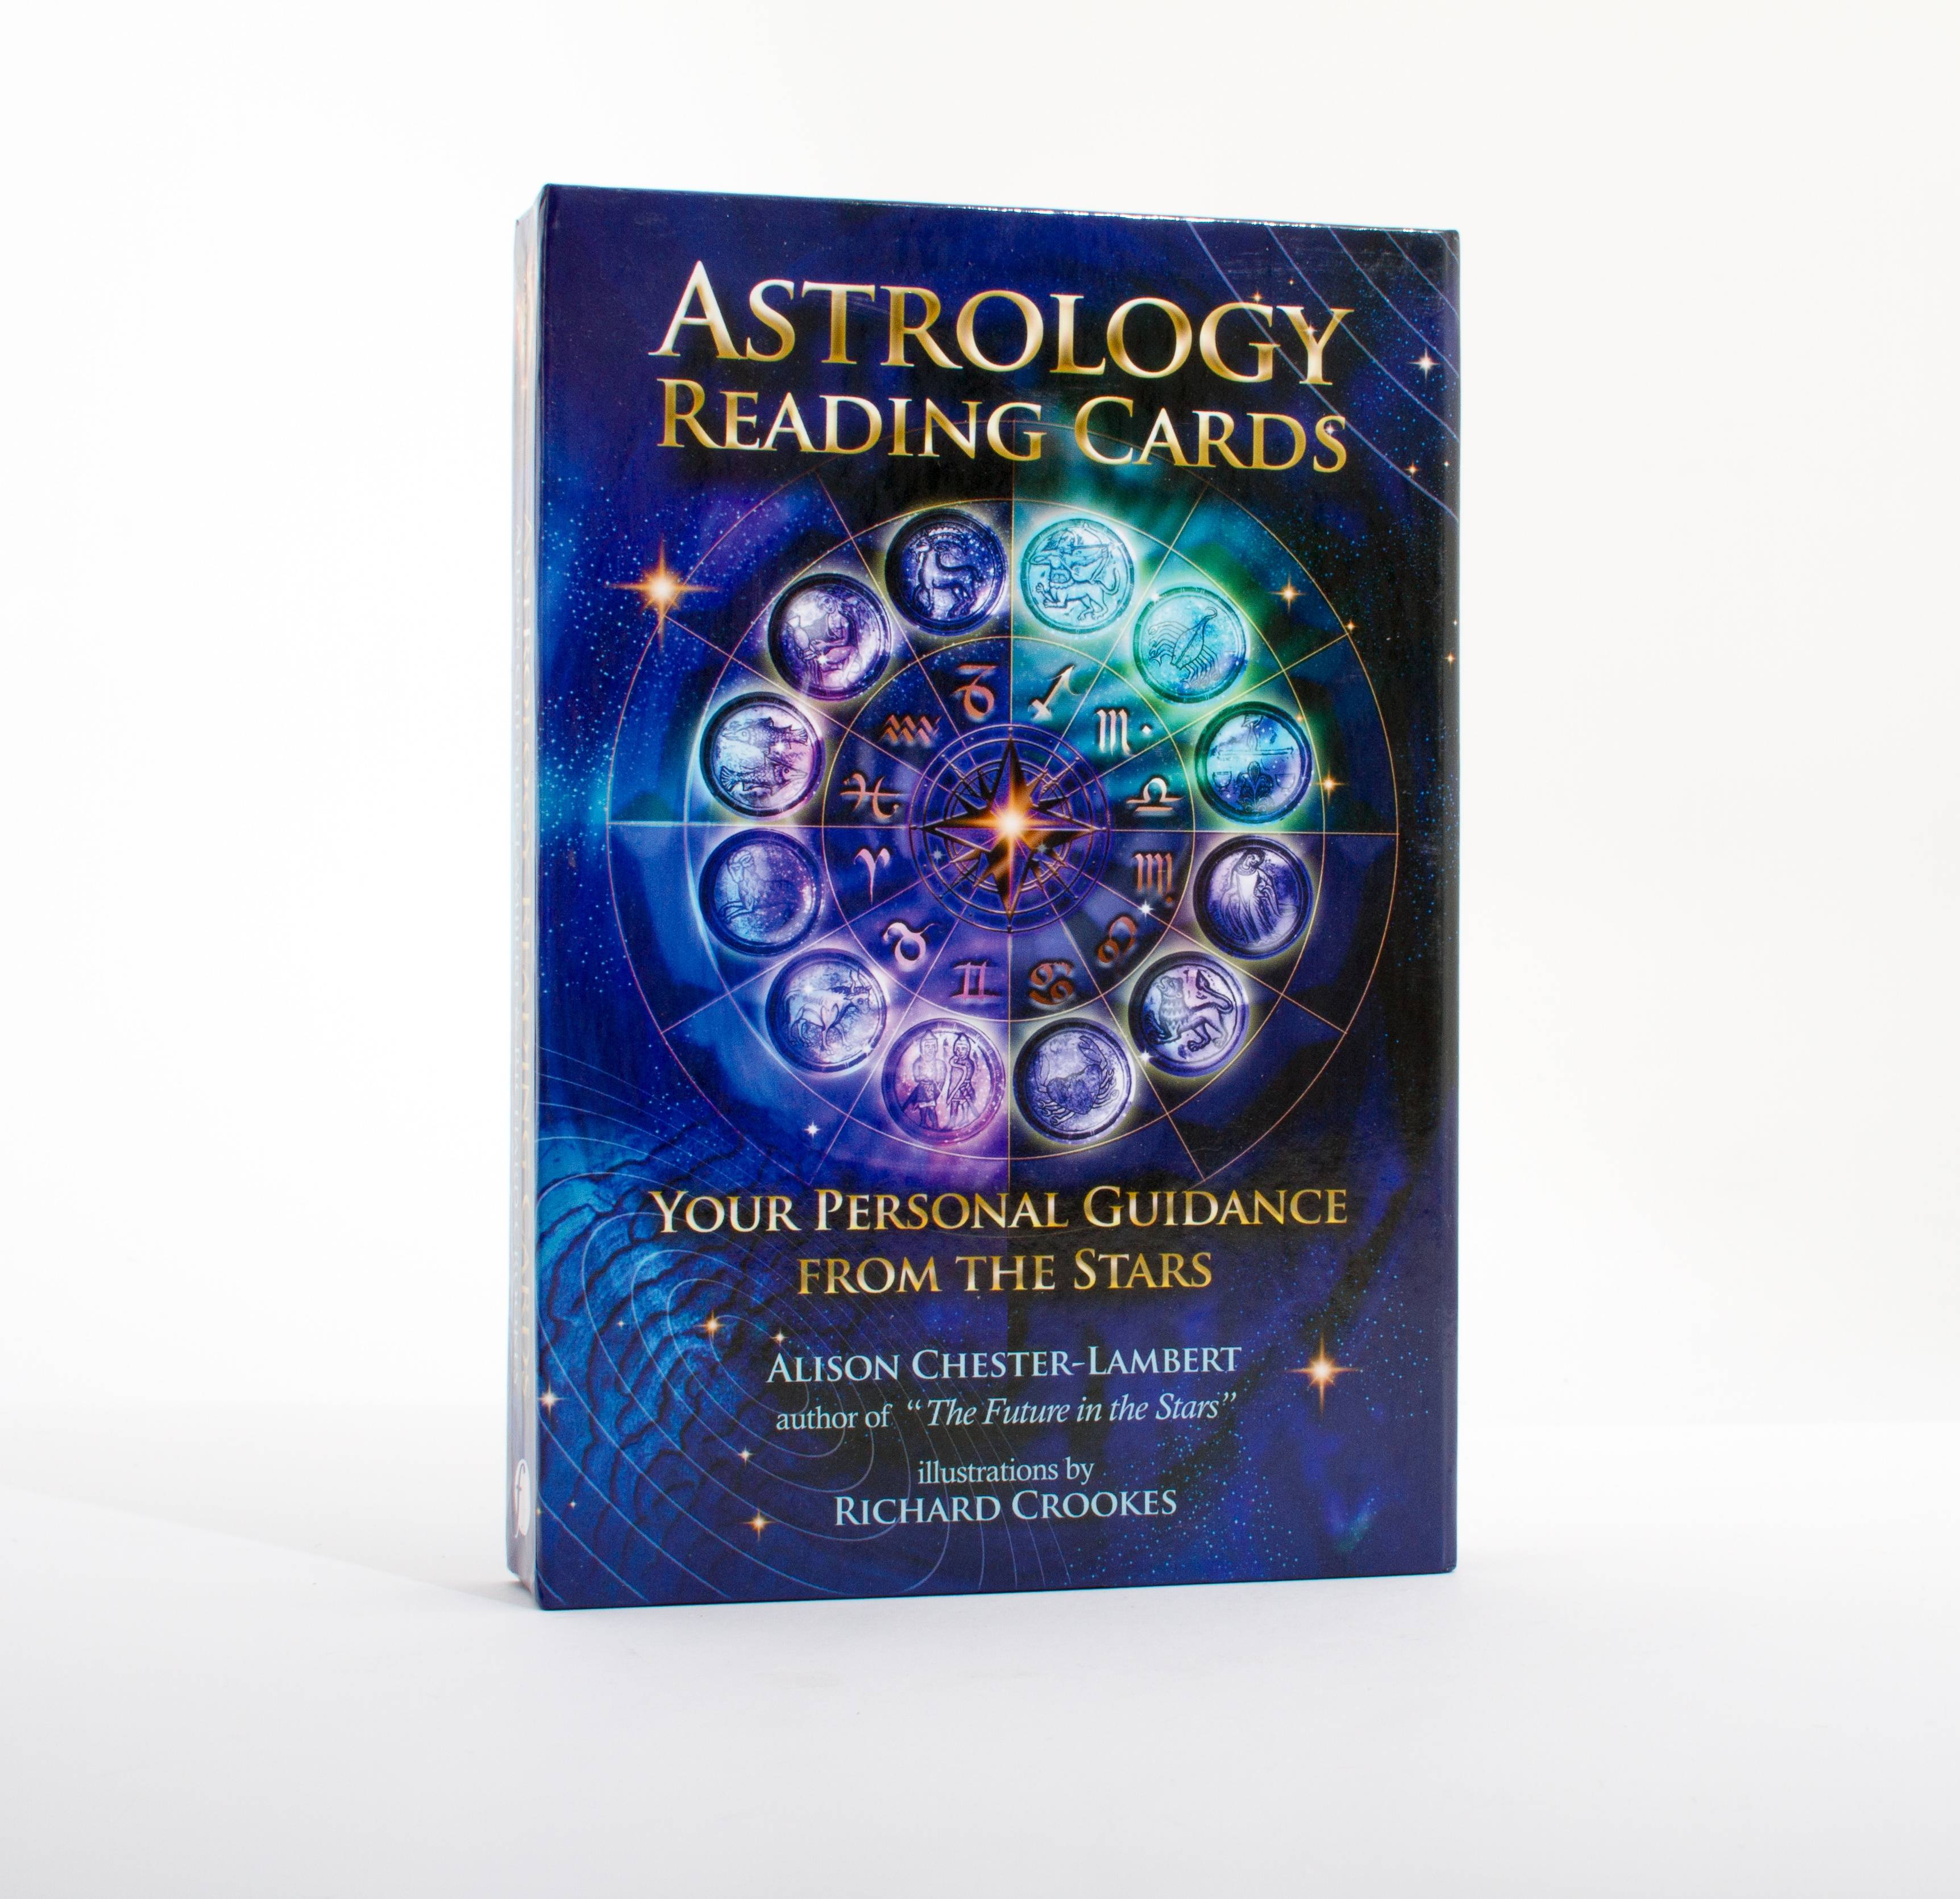 Astrology reading cards - your personal guidance from the stars